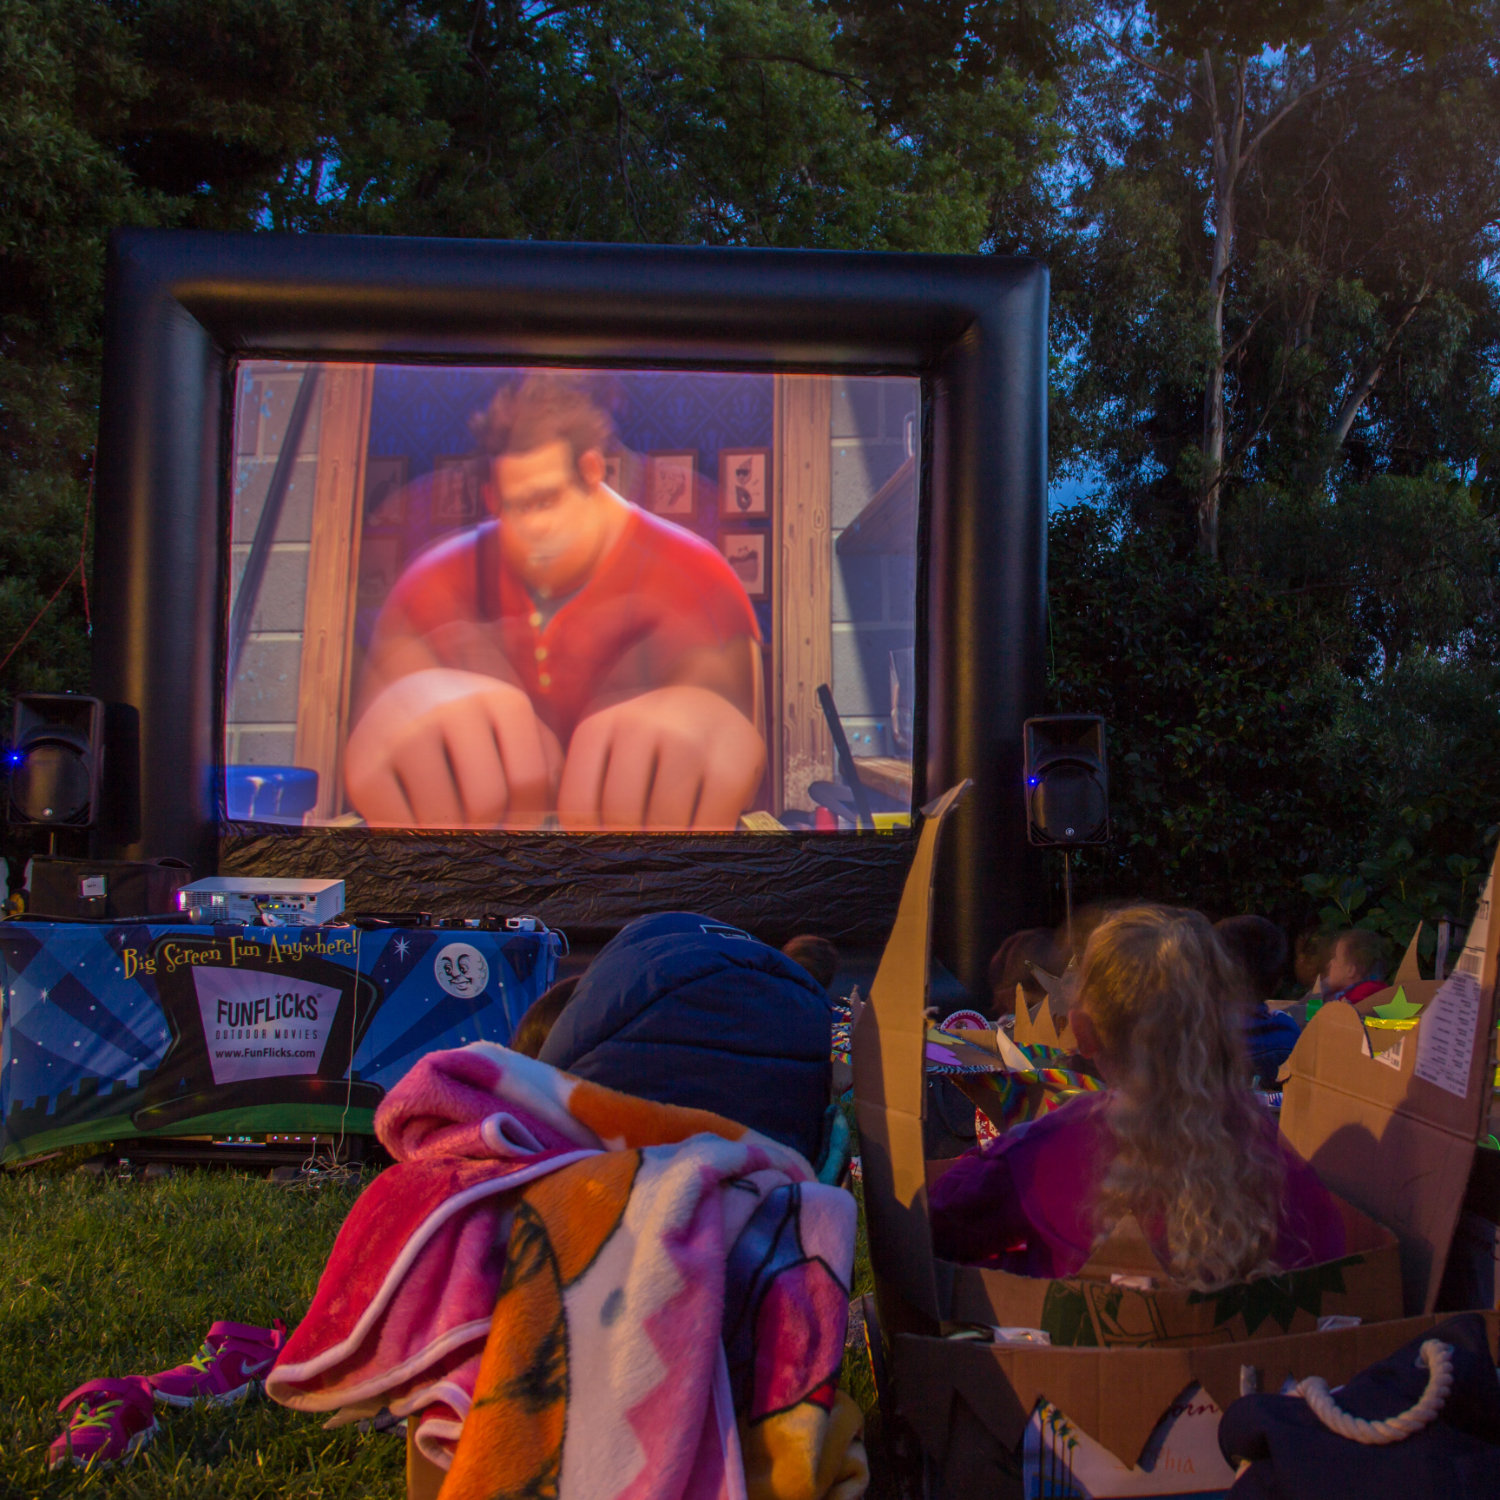 Kids having a mini drive-in movie with a FunFlicks inflatable screen in their crafted, cardboard cars